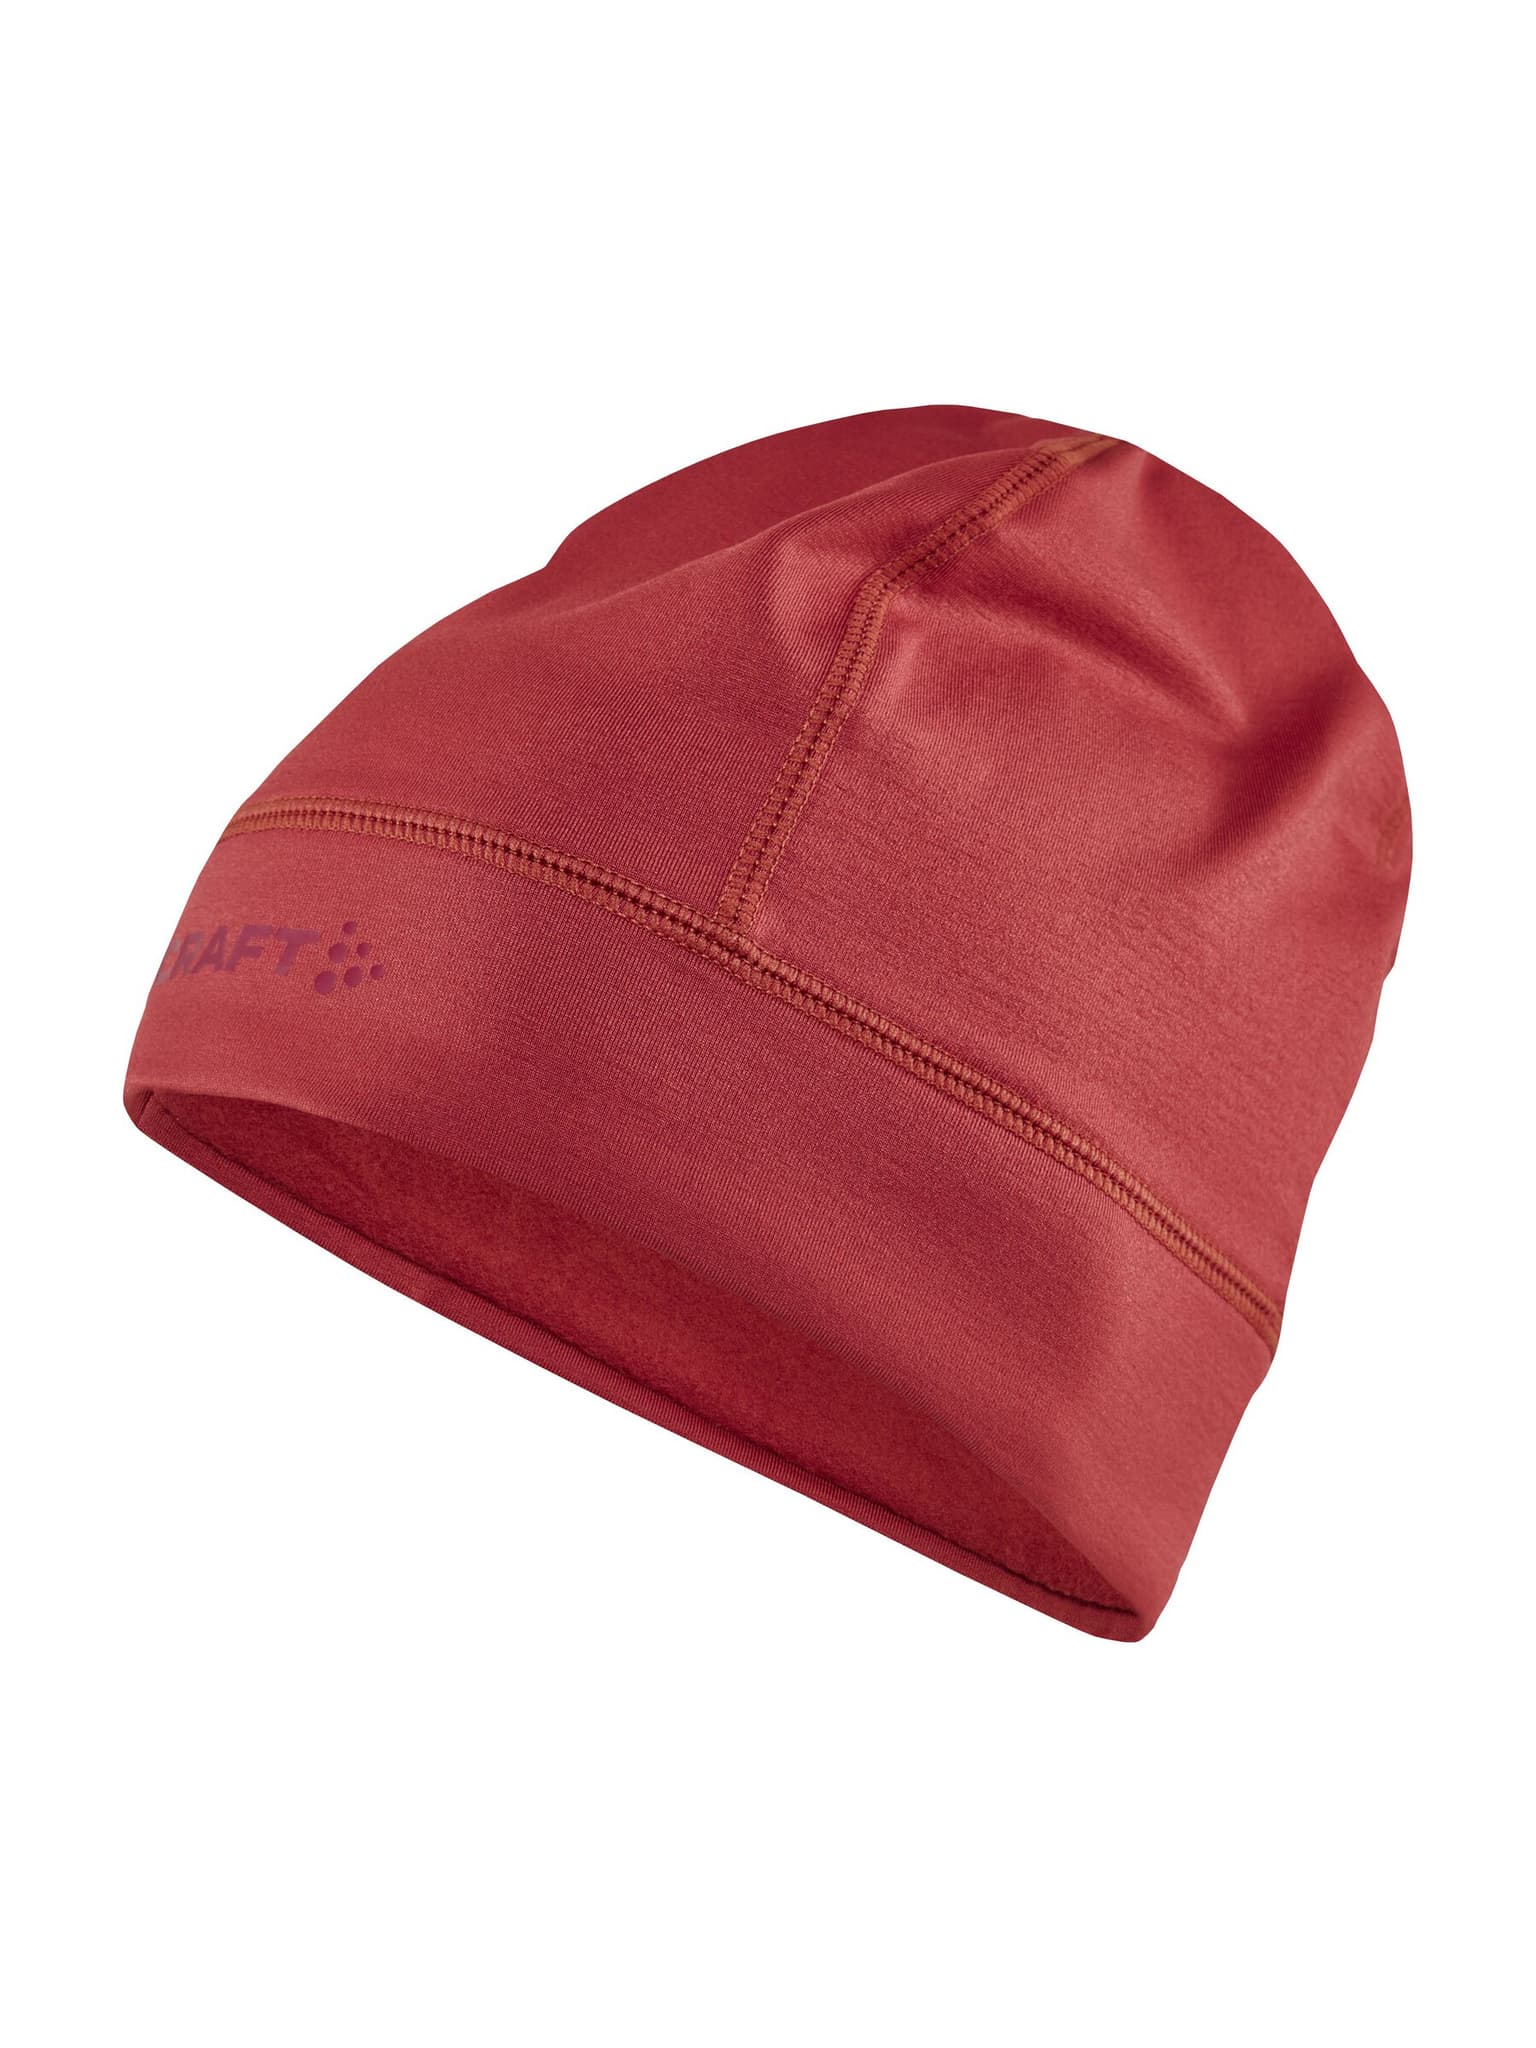 Craft Craft CORE ESSENCE THERMAL HAT Bonnet rouge 1